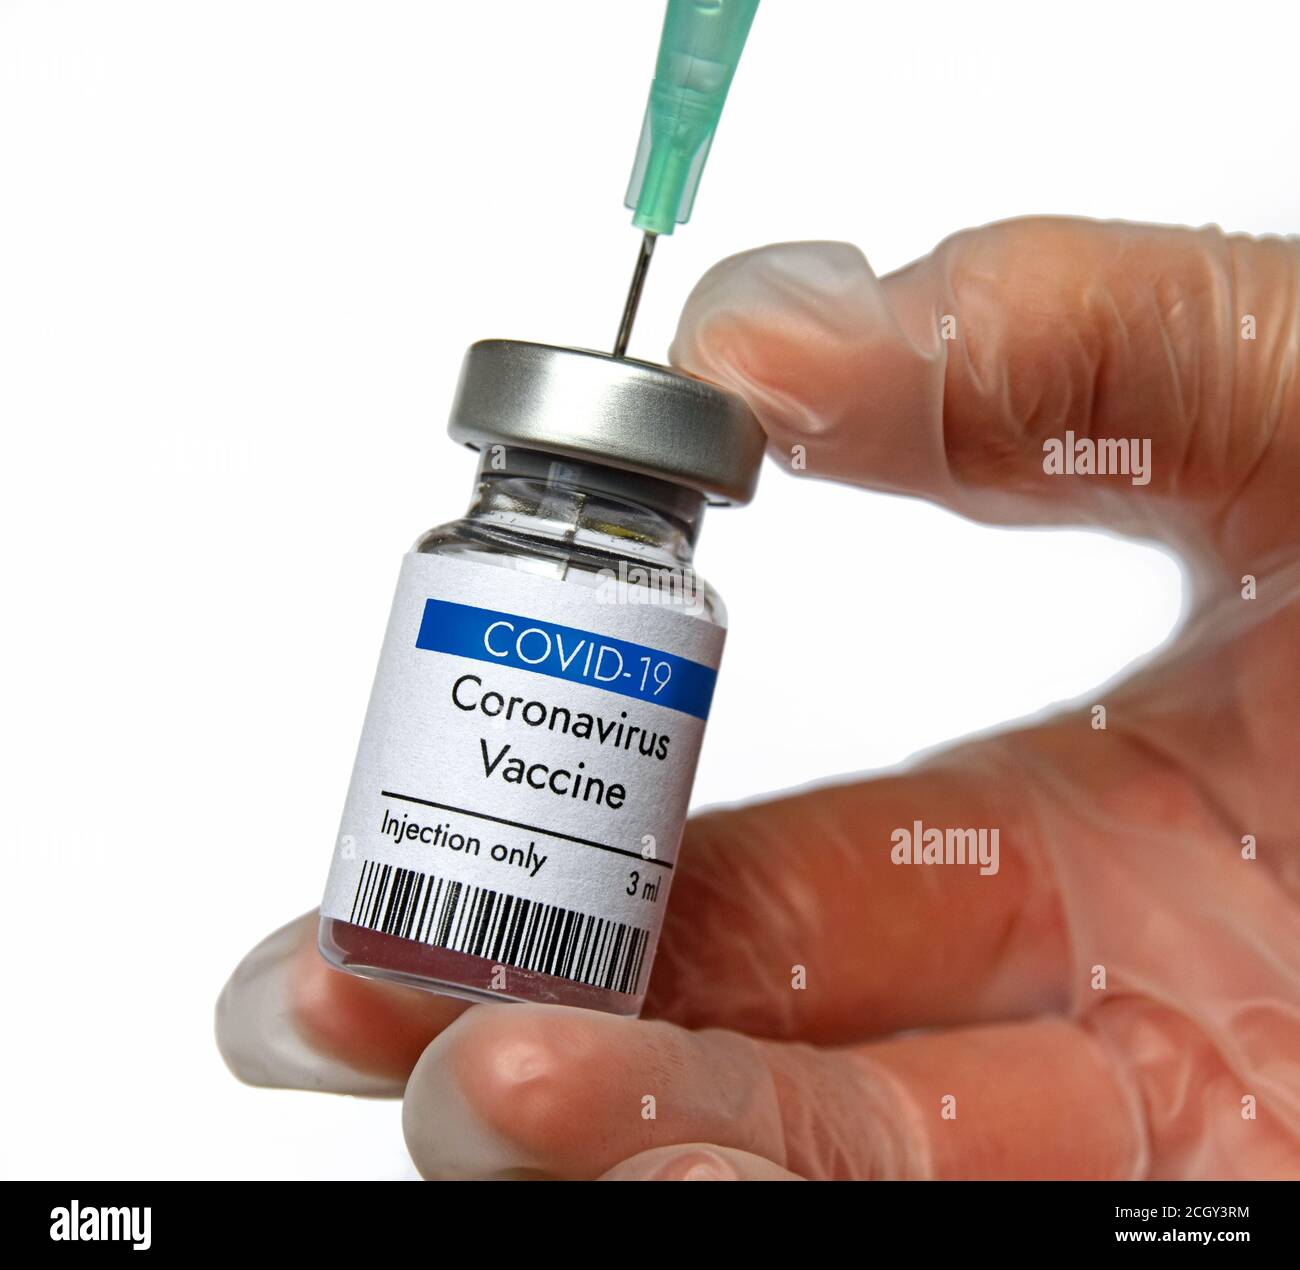 Coronavirus vaccine vial. Vaccine tested in research laboratory. Vaccine in phial in researcher's hand on white background. Close-up view. Stock Photo